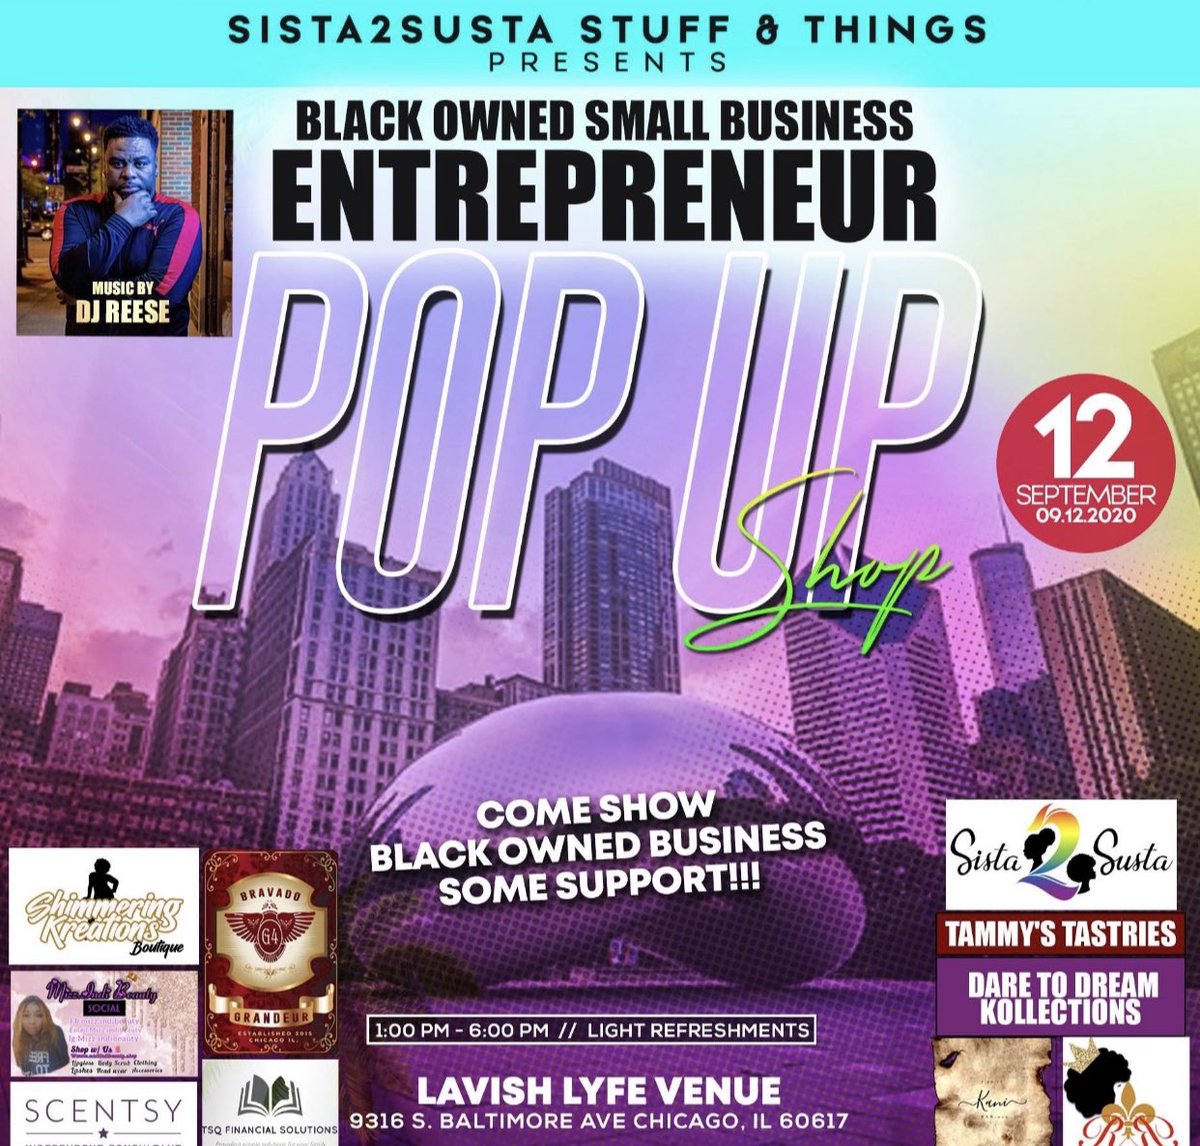 #Chicago I can’t wait to see you! #BreakingNews #popupshop #vendor #ryryproducts #NaturalHairTwitter #makeupaddict #buyingcontent #BusinessTravel #businessgrowth #BusinessNews #BusinessWoman #businessmom #soap #skin #cleaner #PostiveVibes #postiveenergy #golden